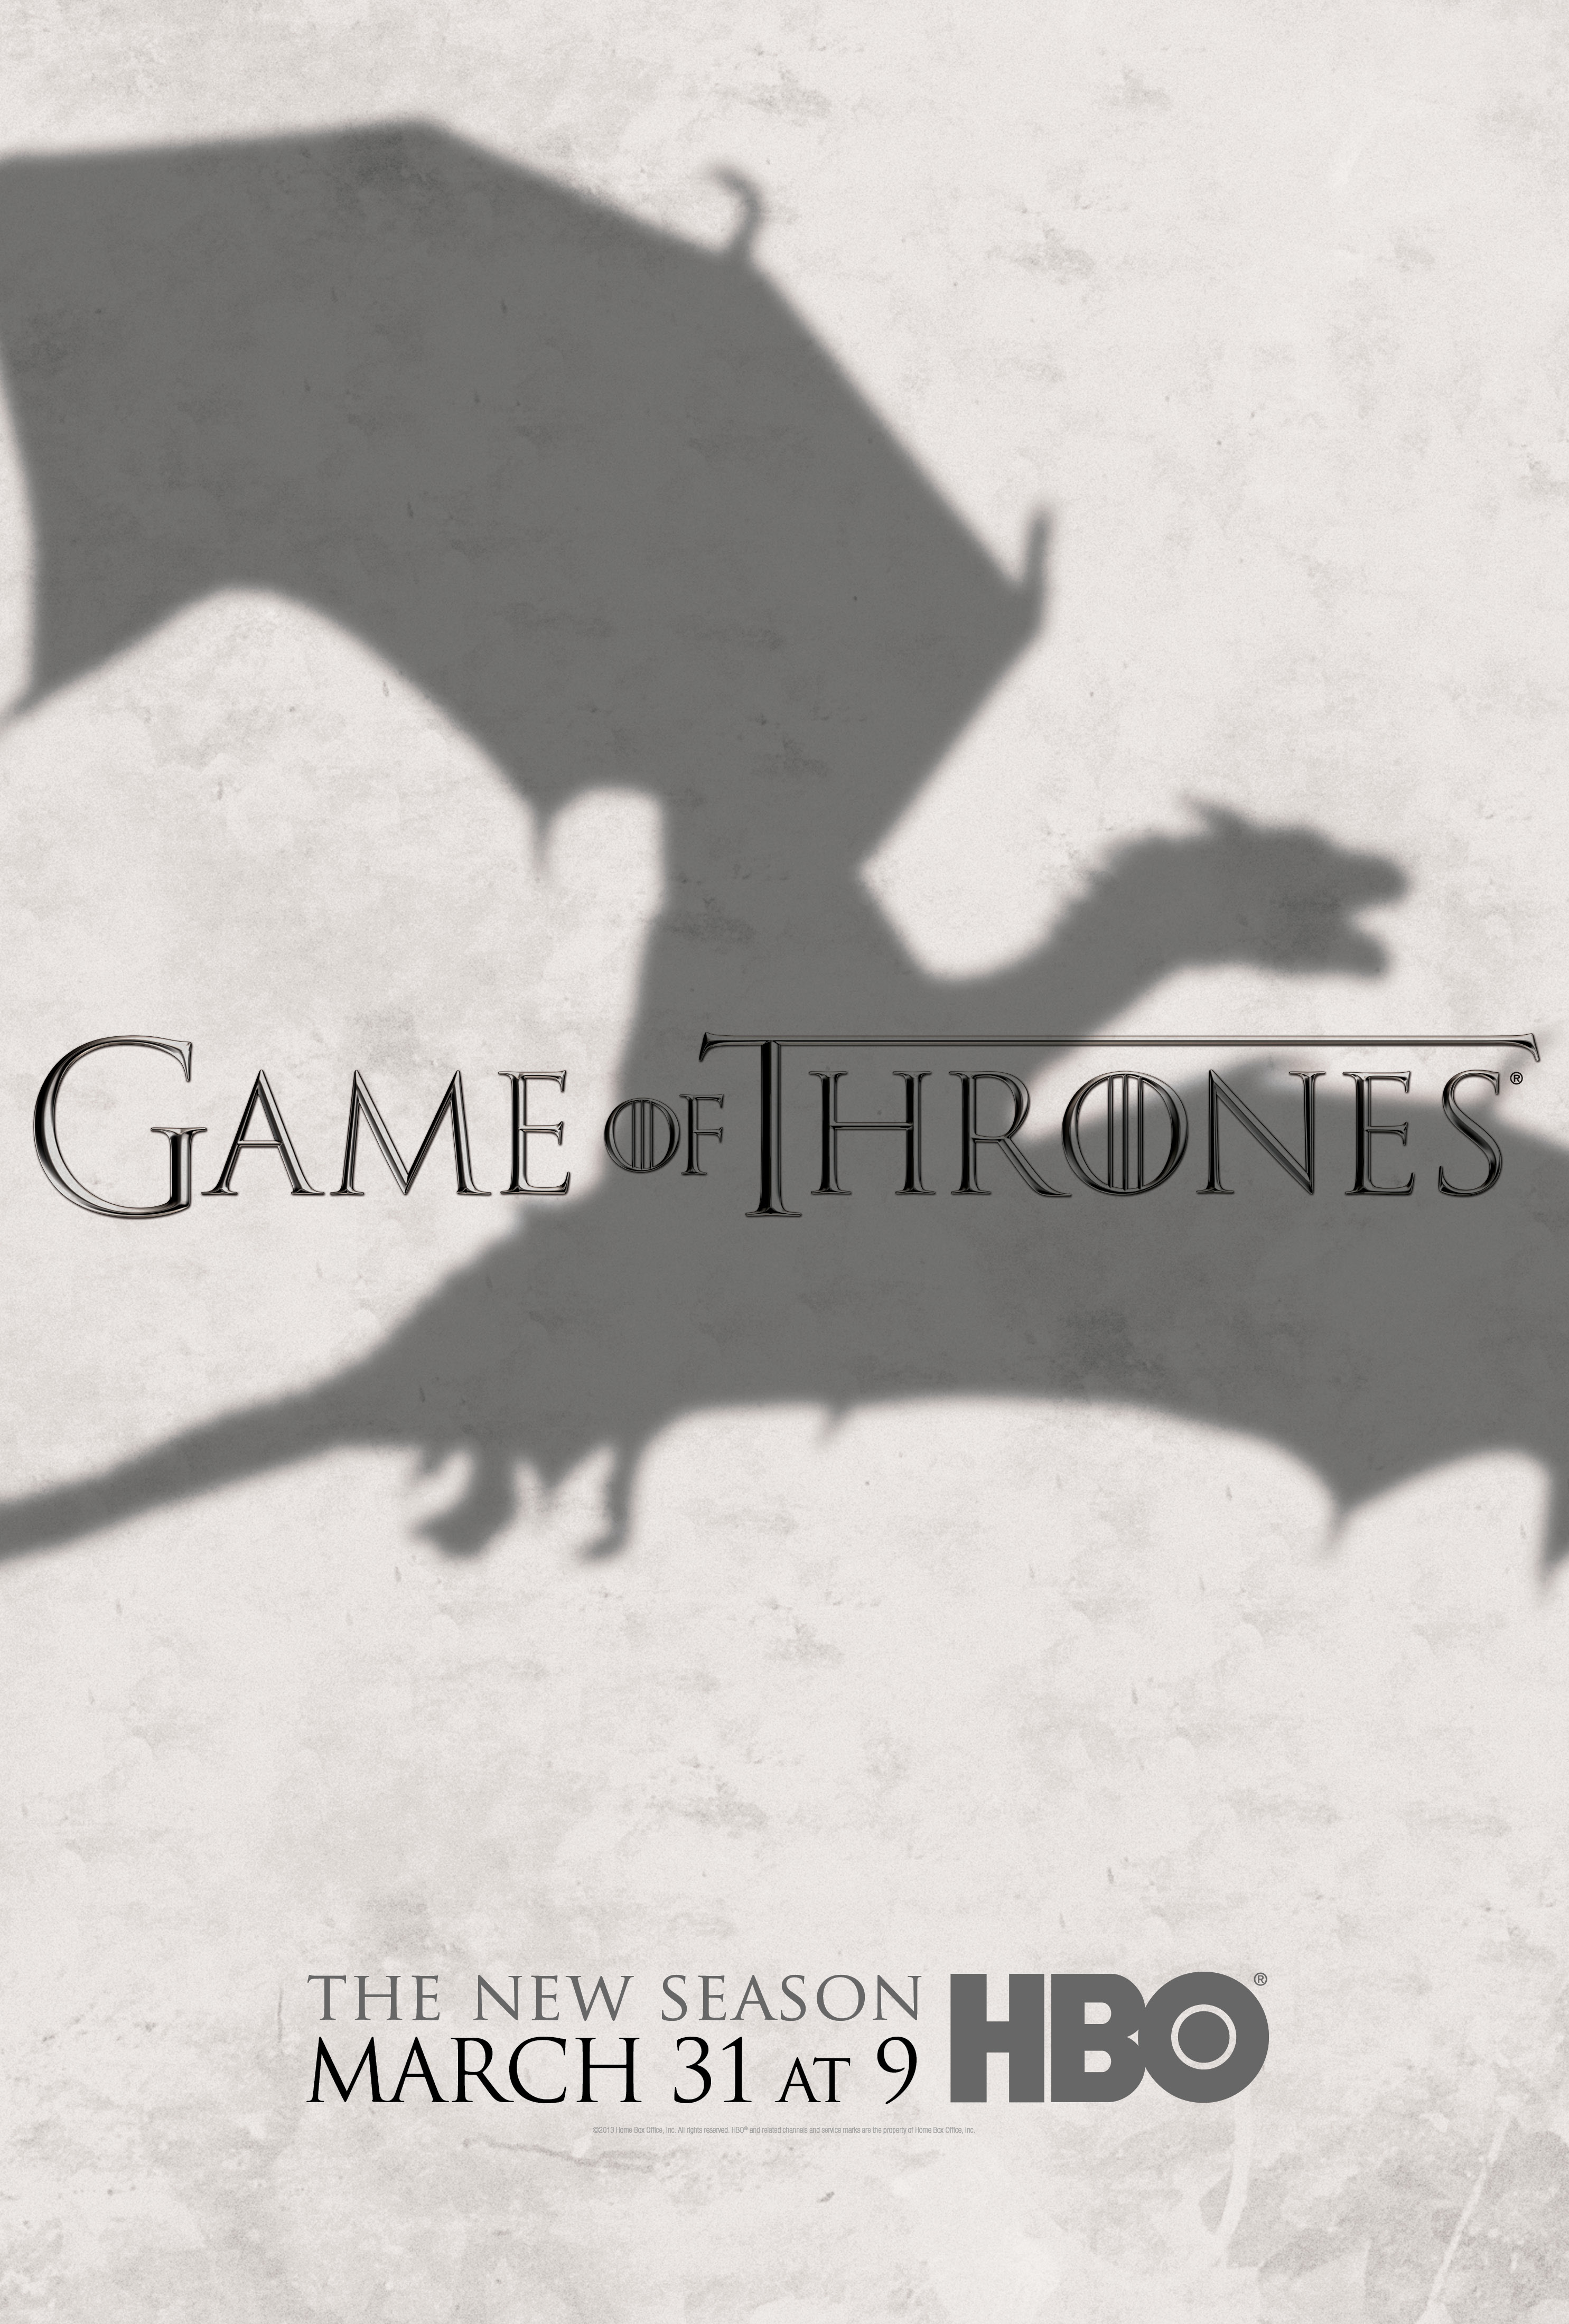 Game of Thrones season 3 complete download mp4, avi from index